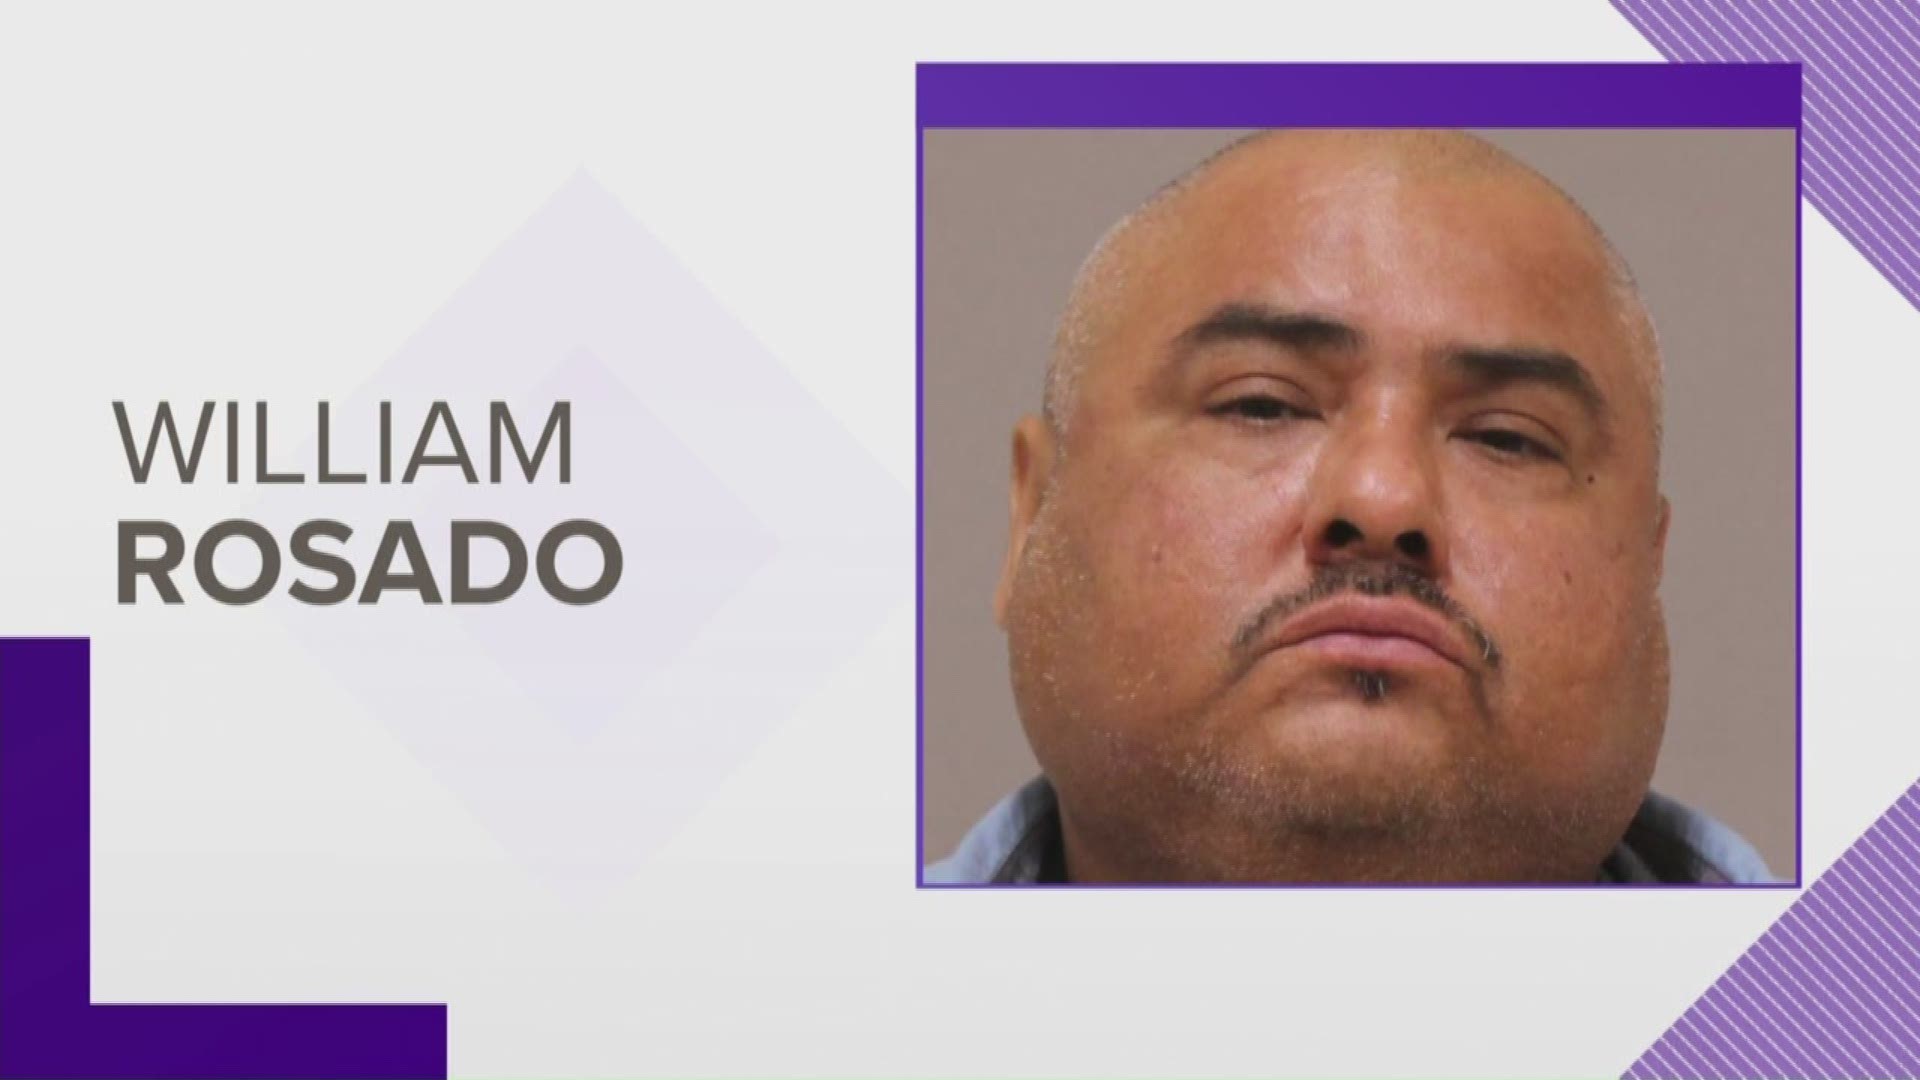 William Rosado told a client of Spectrum Community Services that he had a gun and planned to “unload it on the mall,’’ court records show.